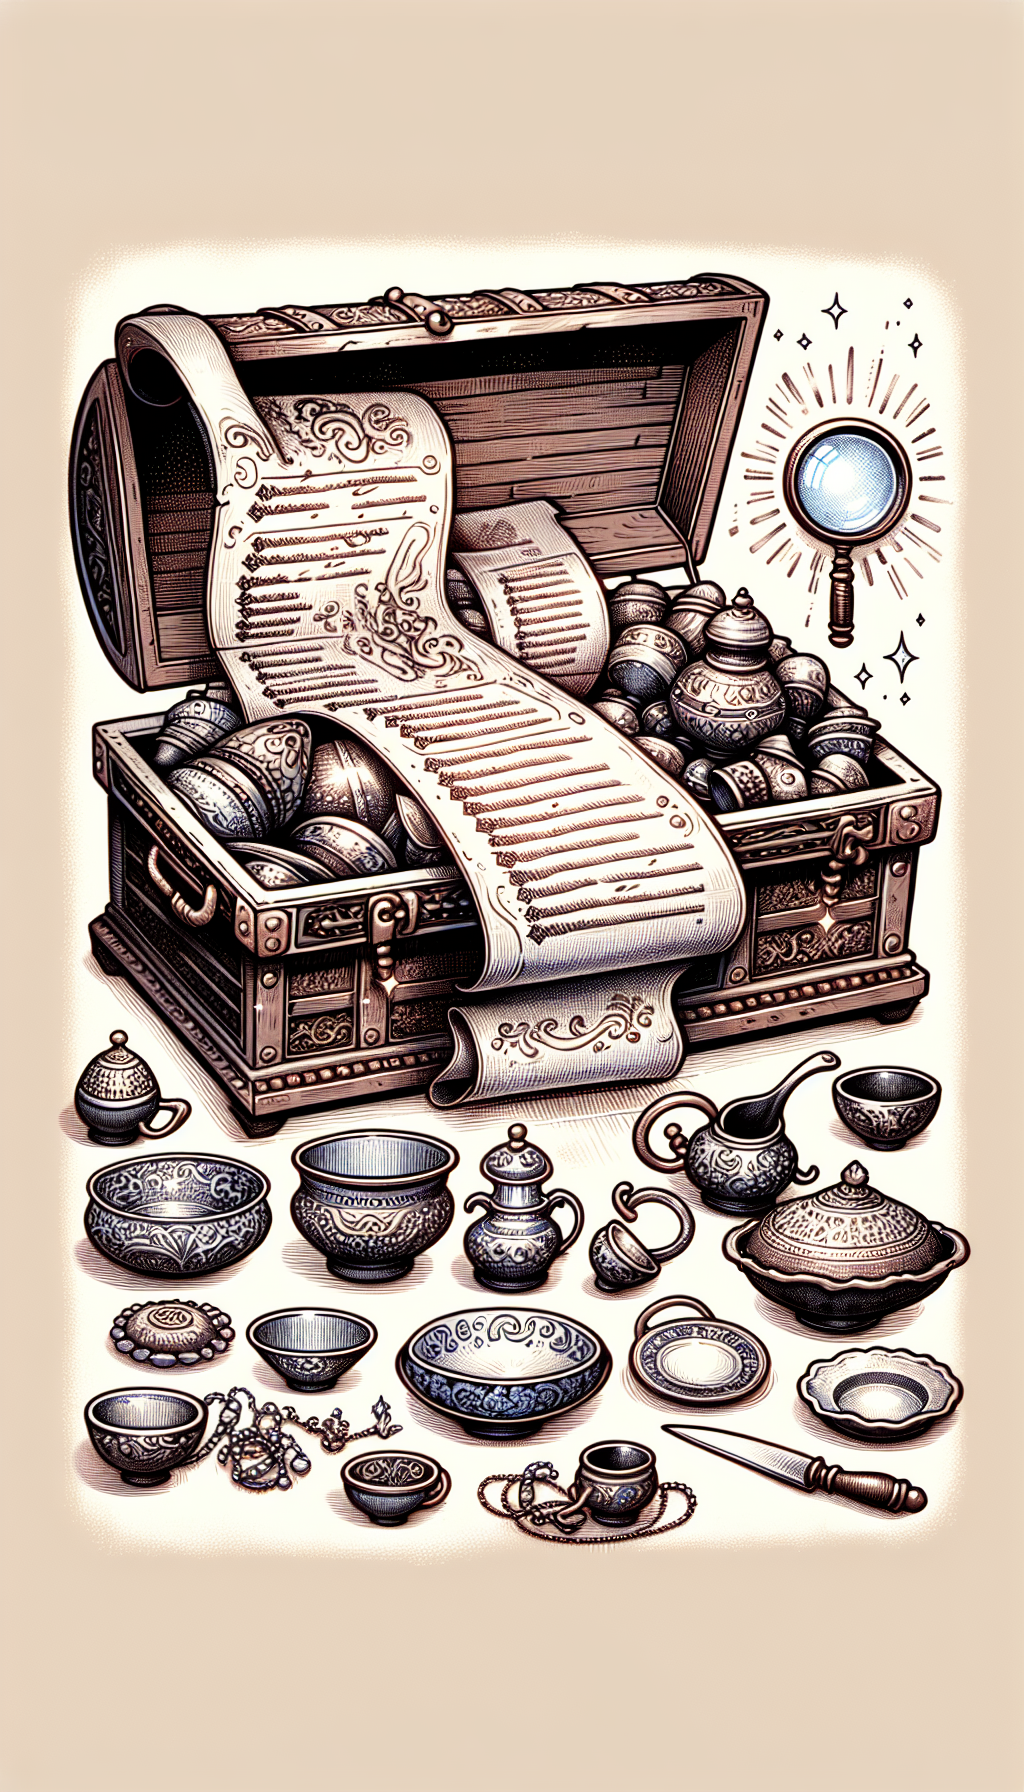 An illustration featuring an opulent treasure chest overflowing with a variety of antique dishes, each with intricate patterns glowing subtly to signify their rarity and value. A magnifying glass hovers over, revealing a scroll beneath that unfurls into a list with highlighted priceless items. The art mixes detailed realism for the dishes with a whimsical cartoonish chest and a parchment list stylized with elegant calligraphy.